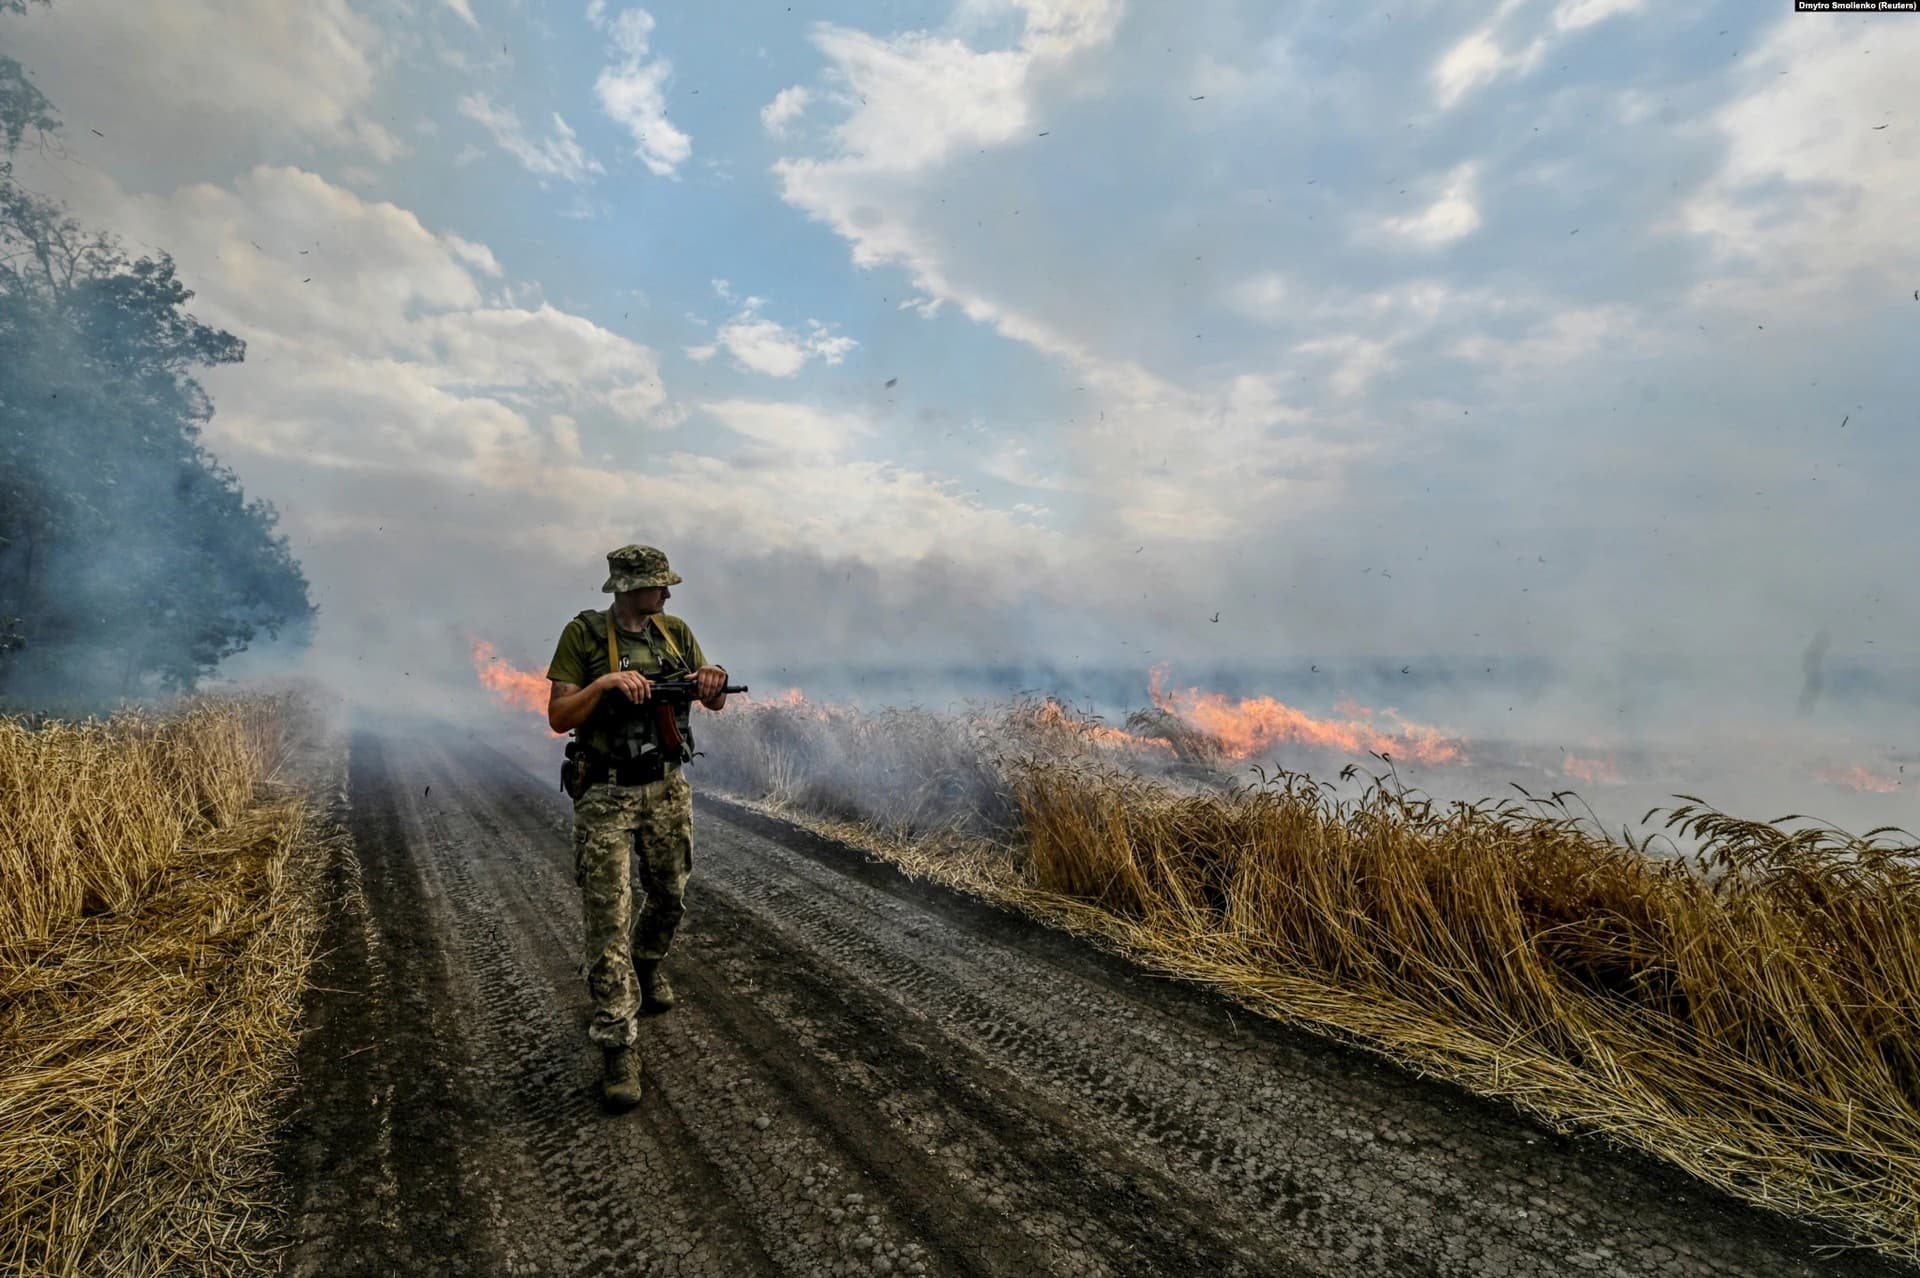 A Ukrainian fighter walks past a burning wheat field in eastern Ukraine near the front lines of the Russian advance on July 17